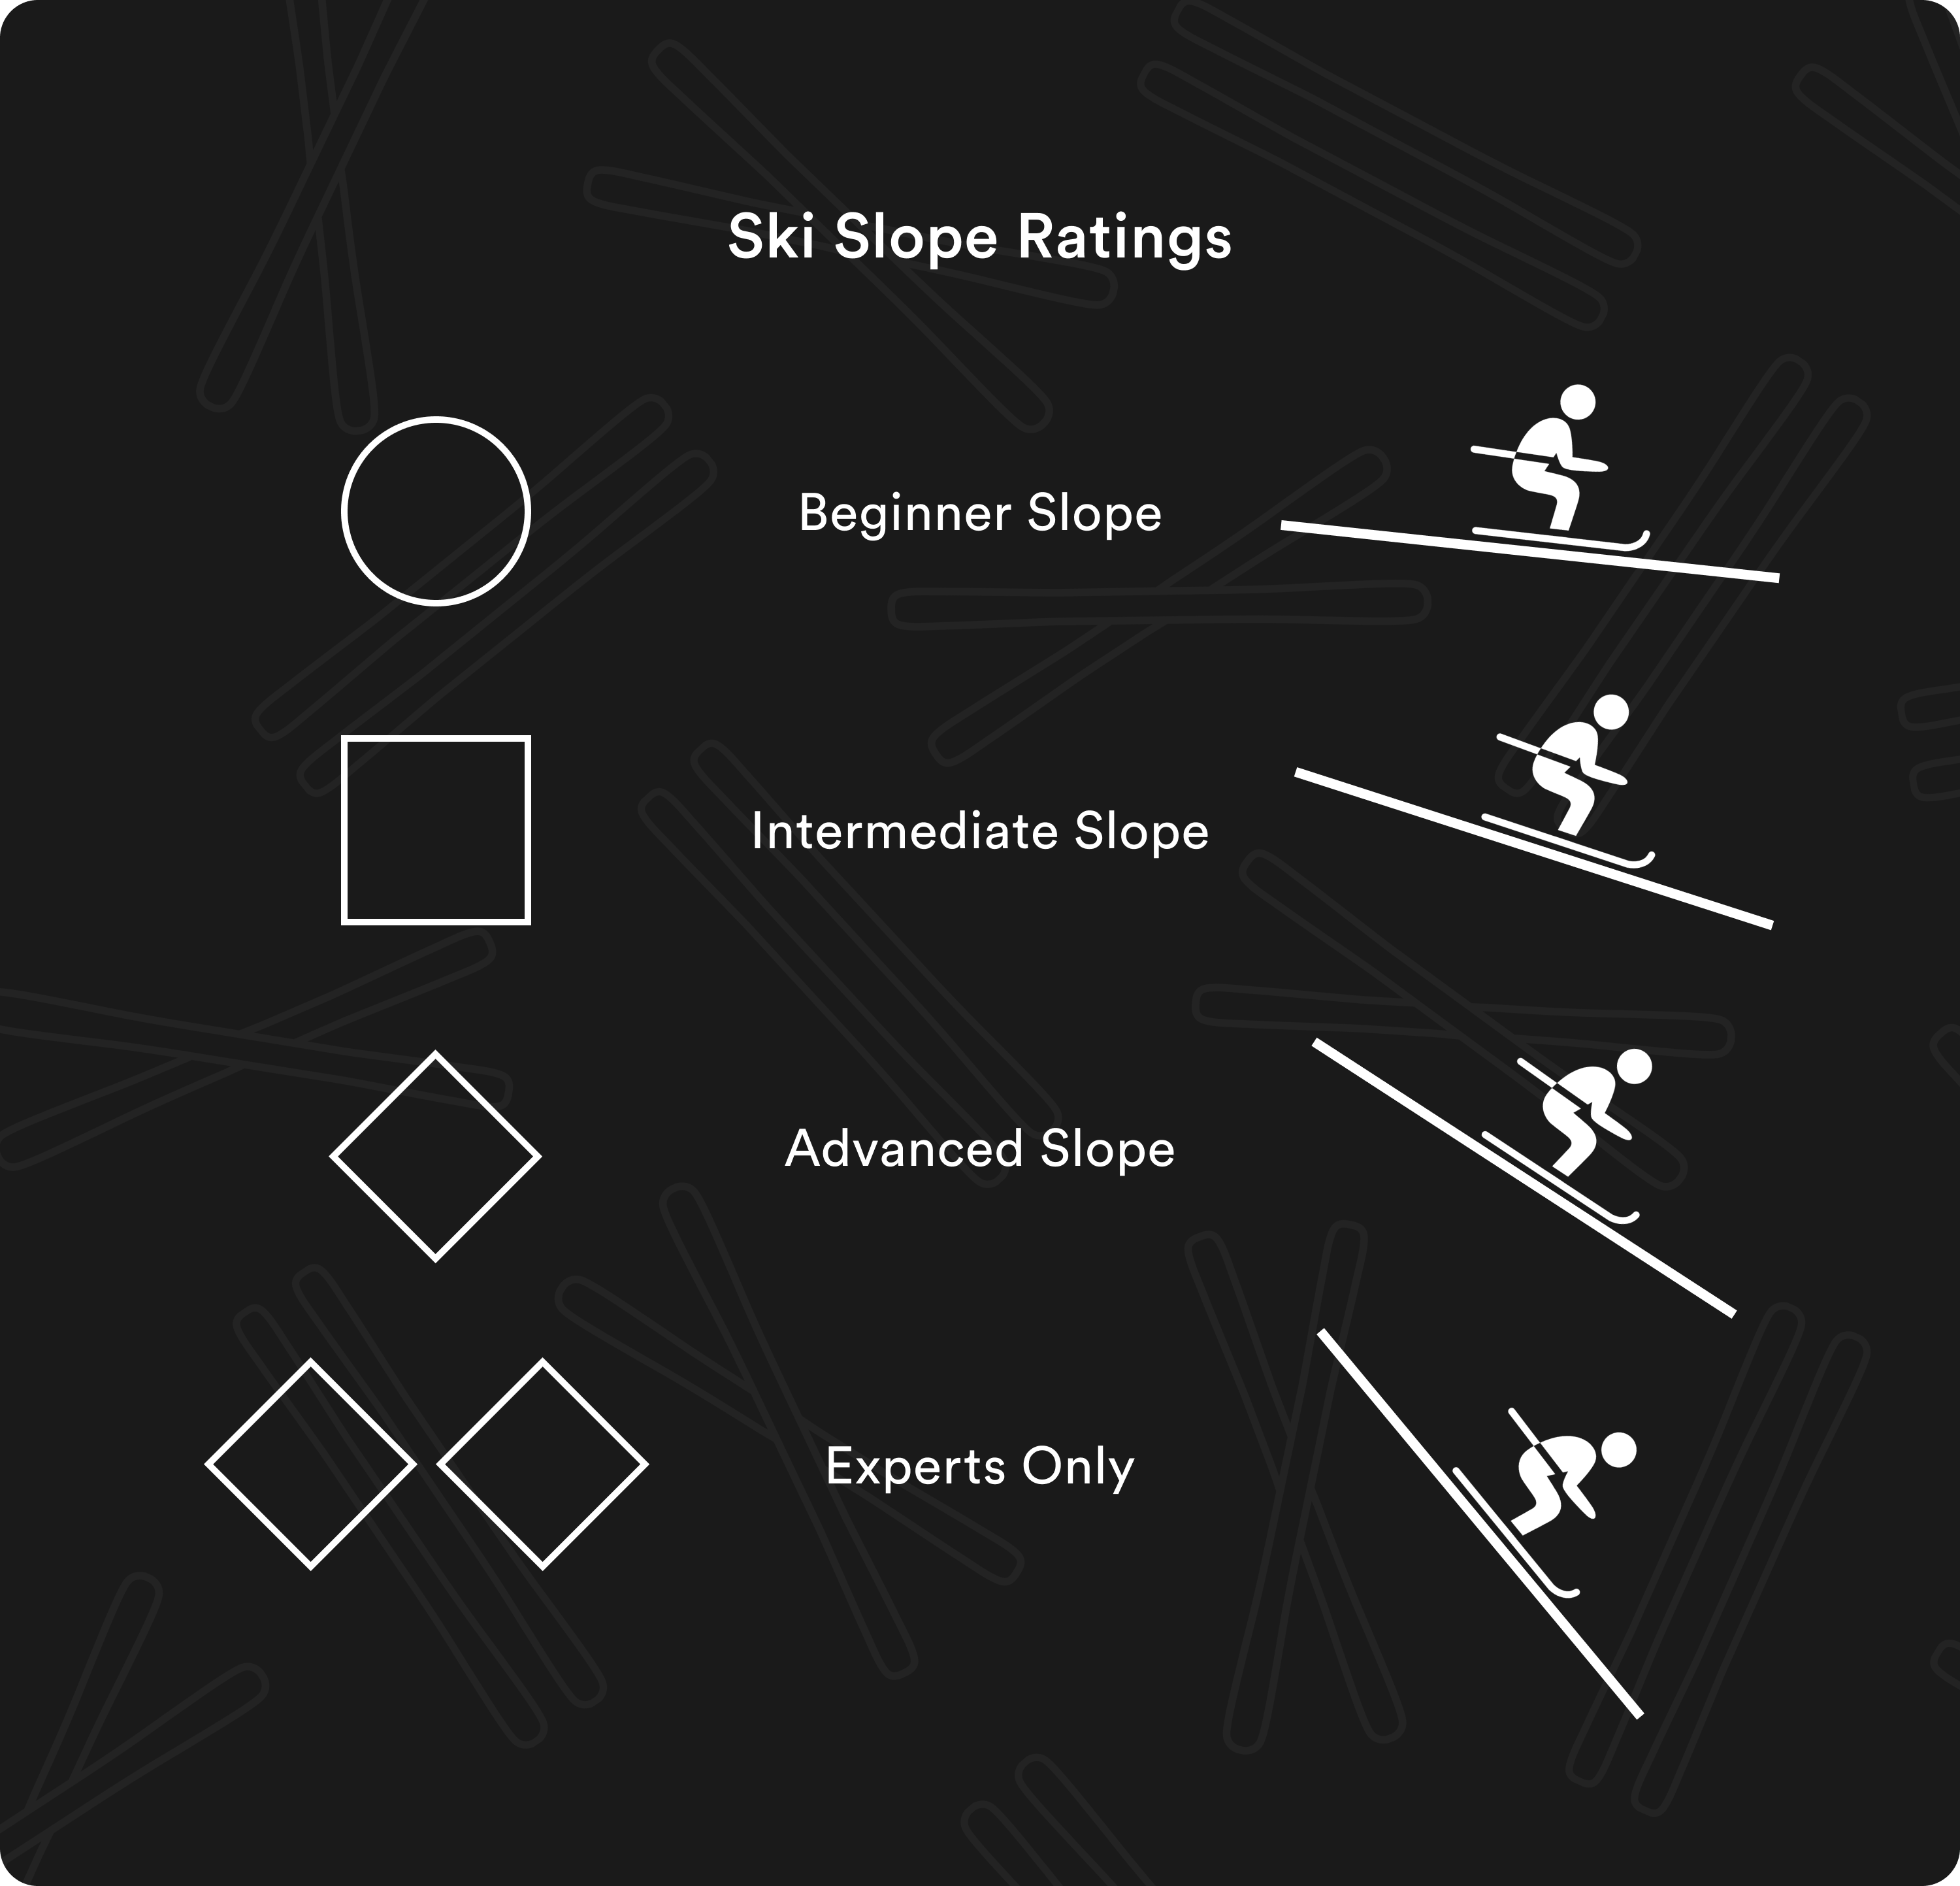 An infographic showing different ski slope ratings from beginner slope, intermediate slope, advanced slope, and experts only.